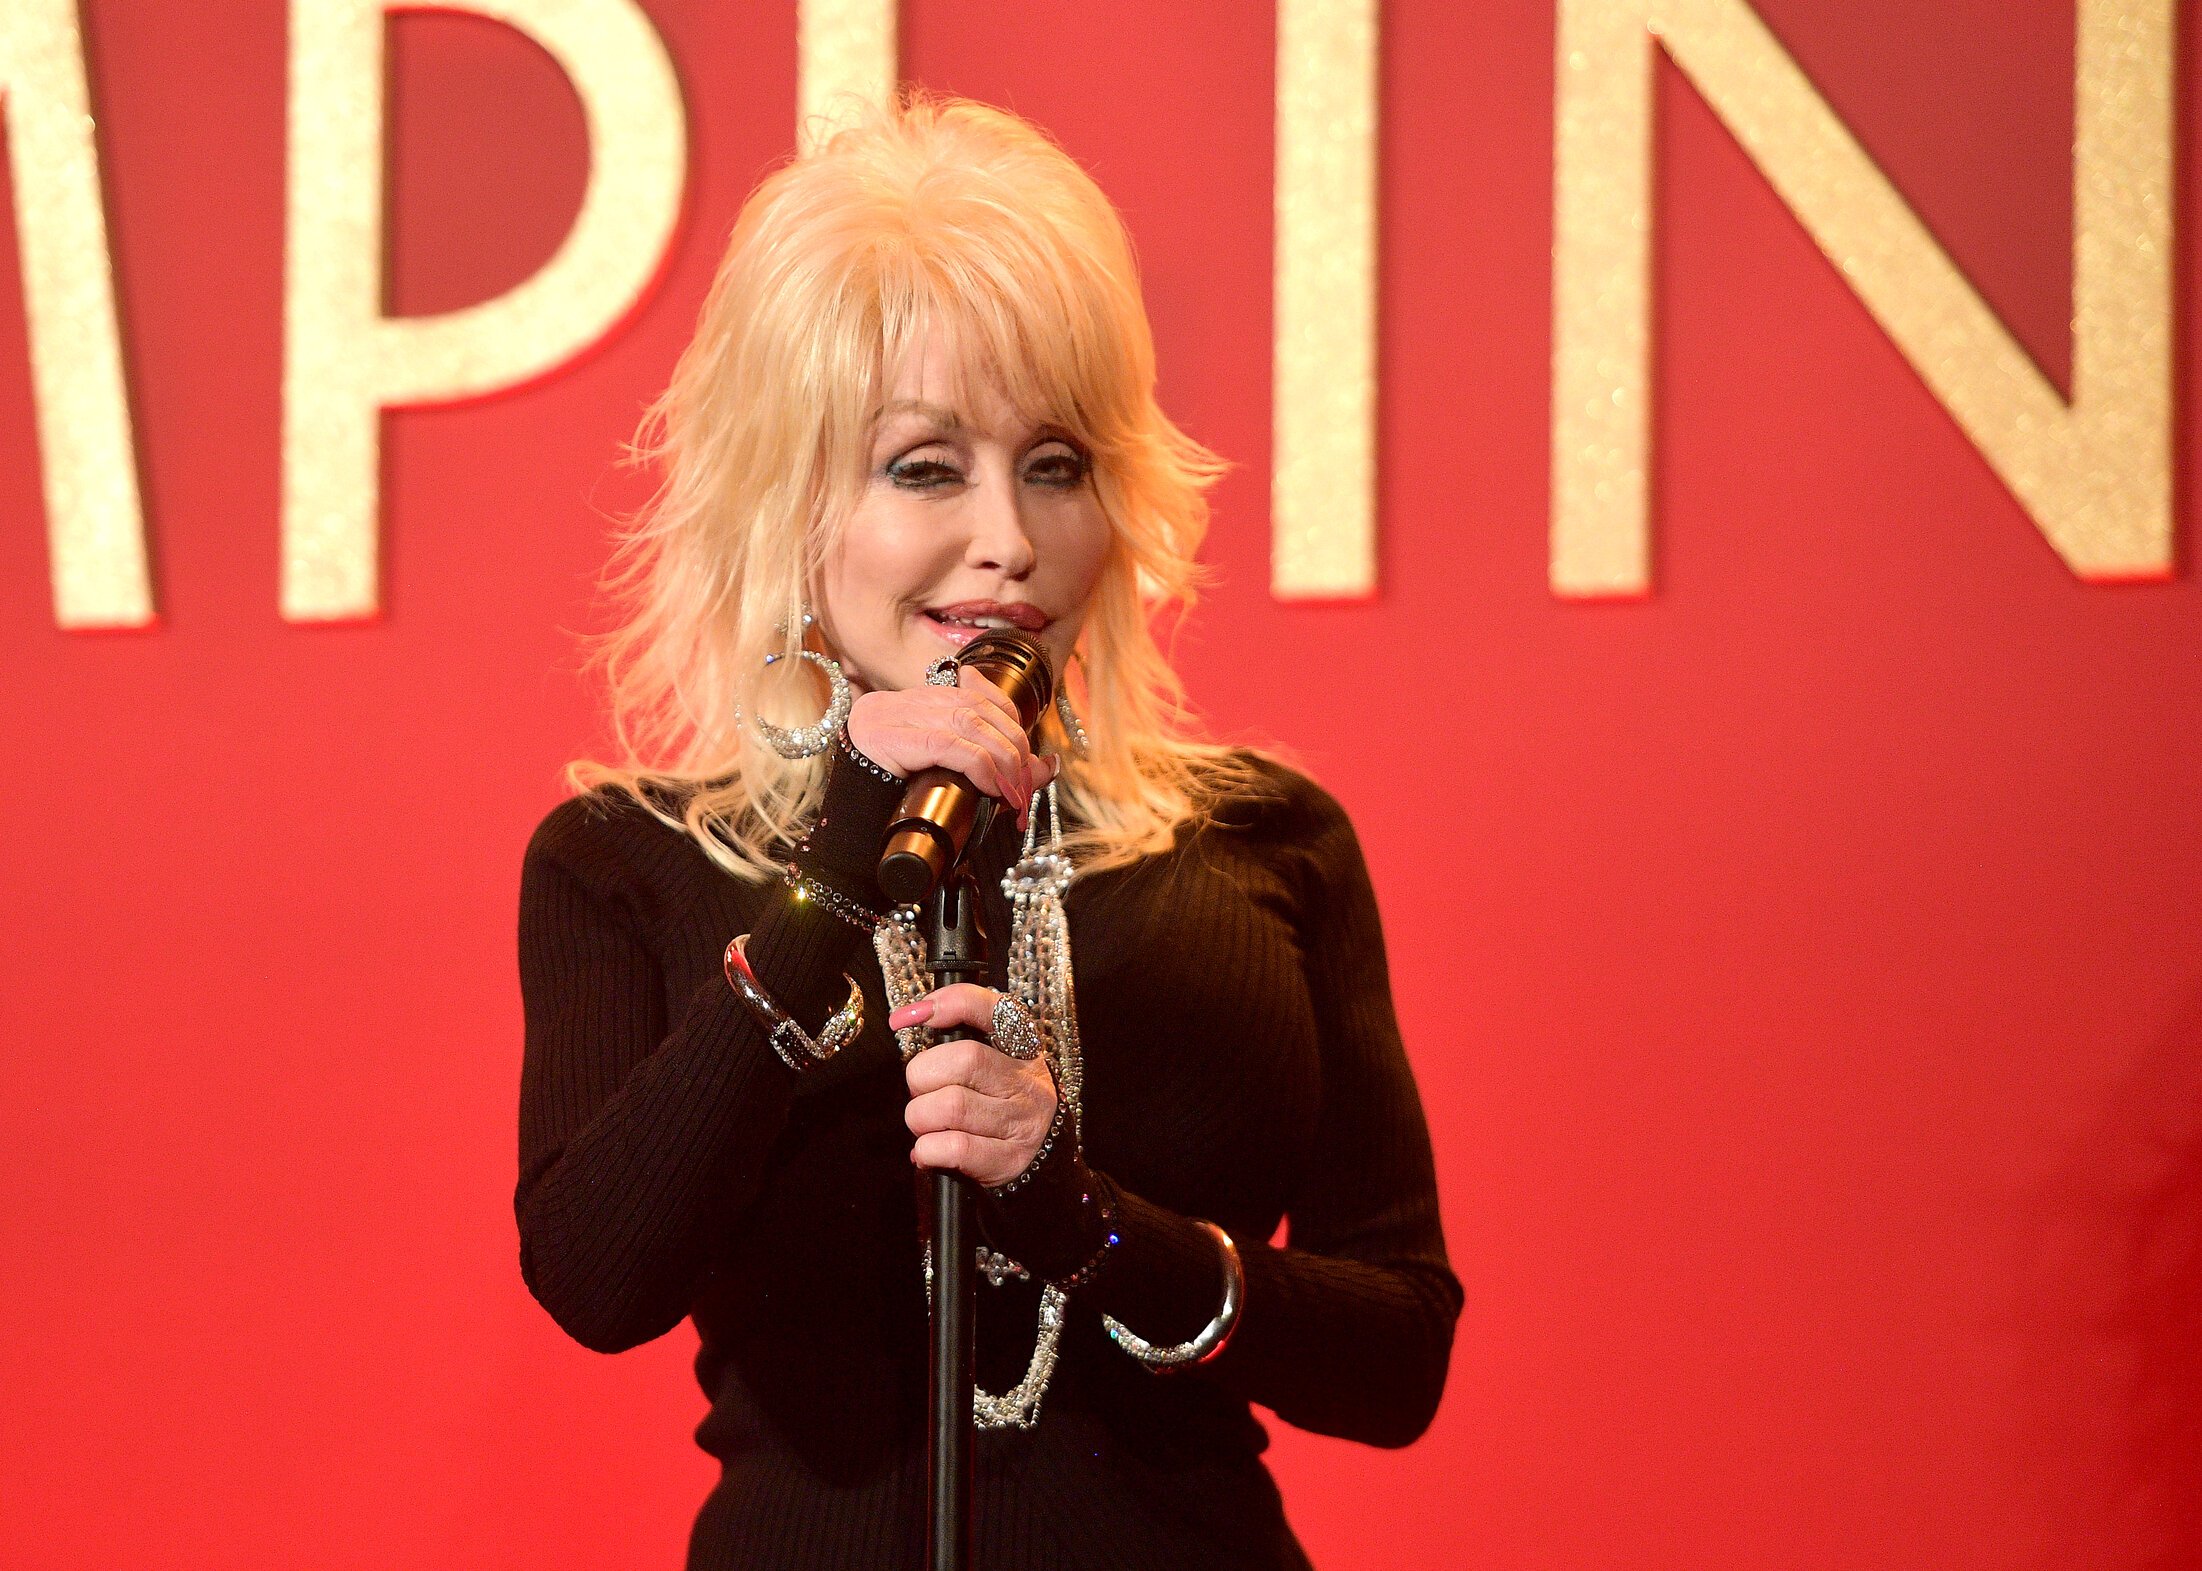 Dolly Parton performs onstage wearing a black outfit in 2018